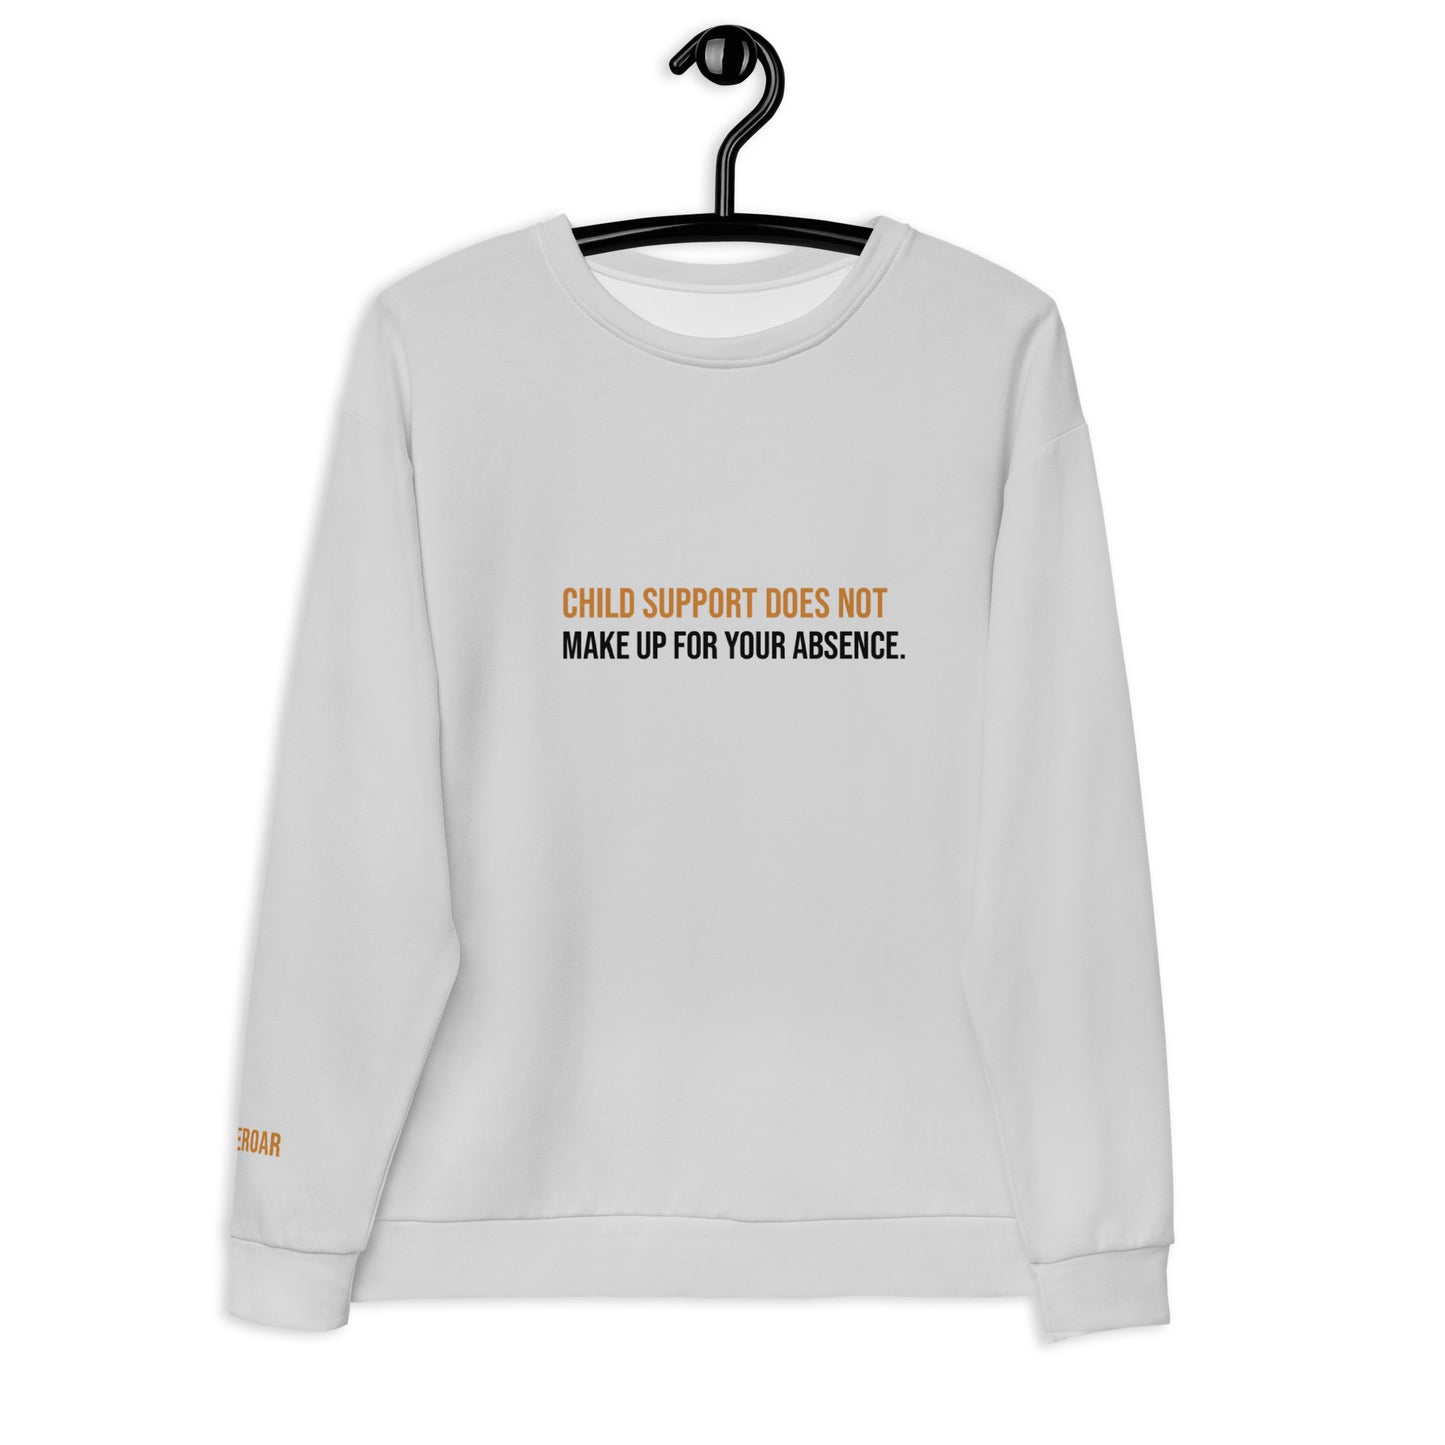 Child Support Does Not Make Up For Your Absence Unisex Sweatshirt